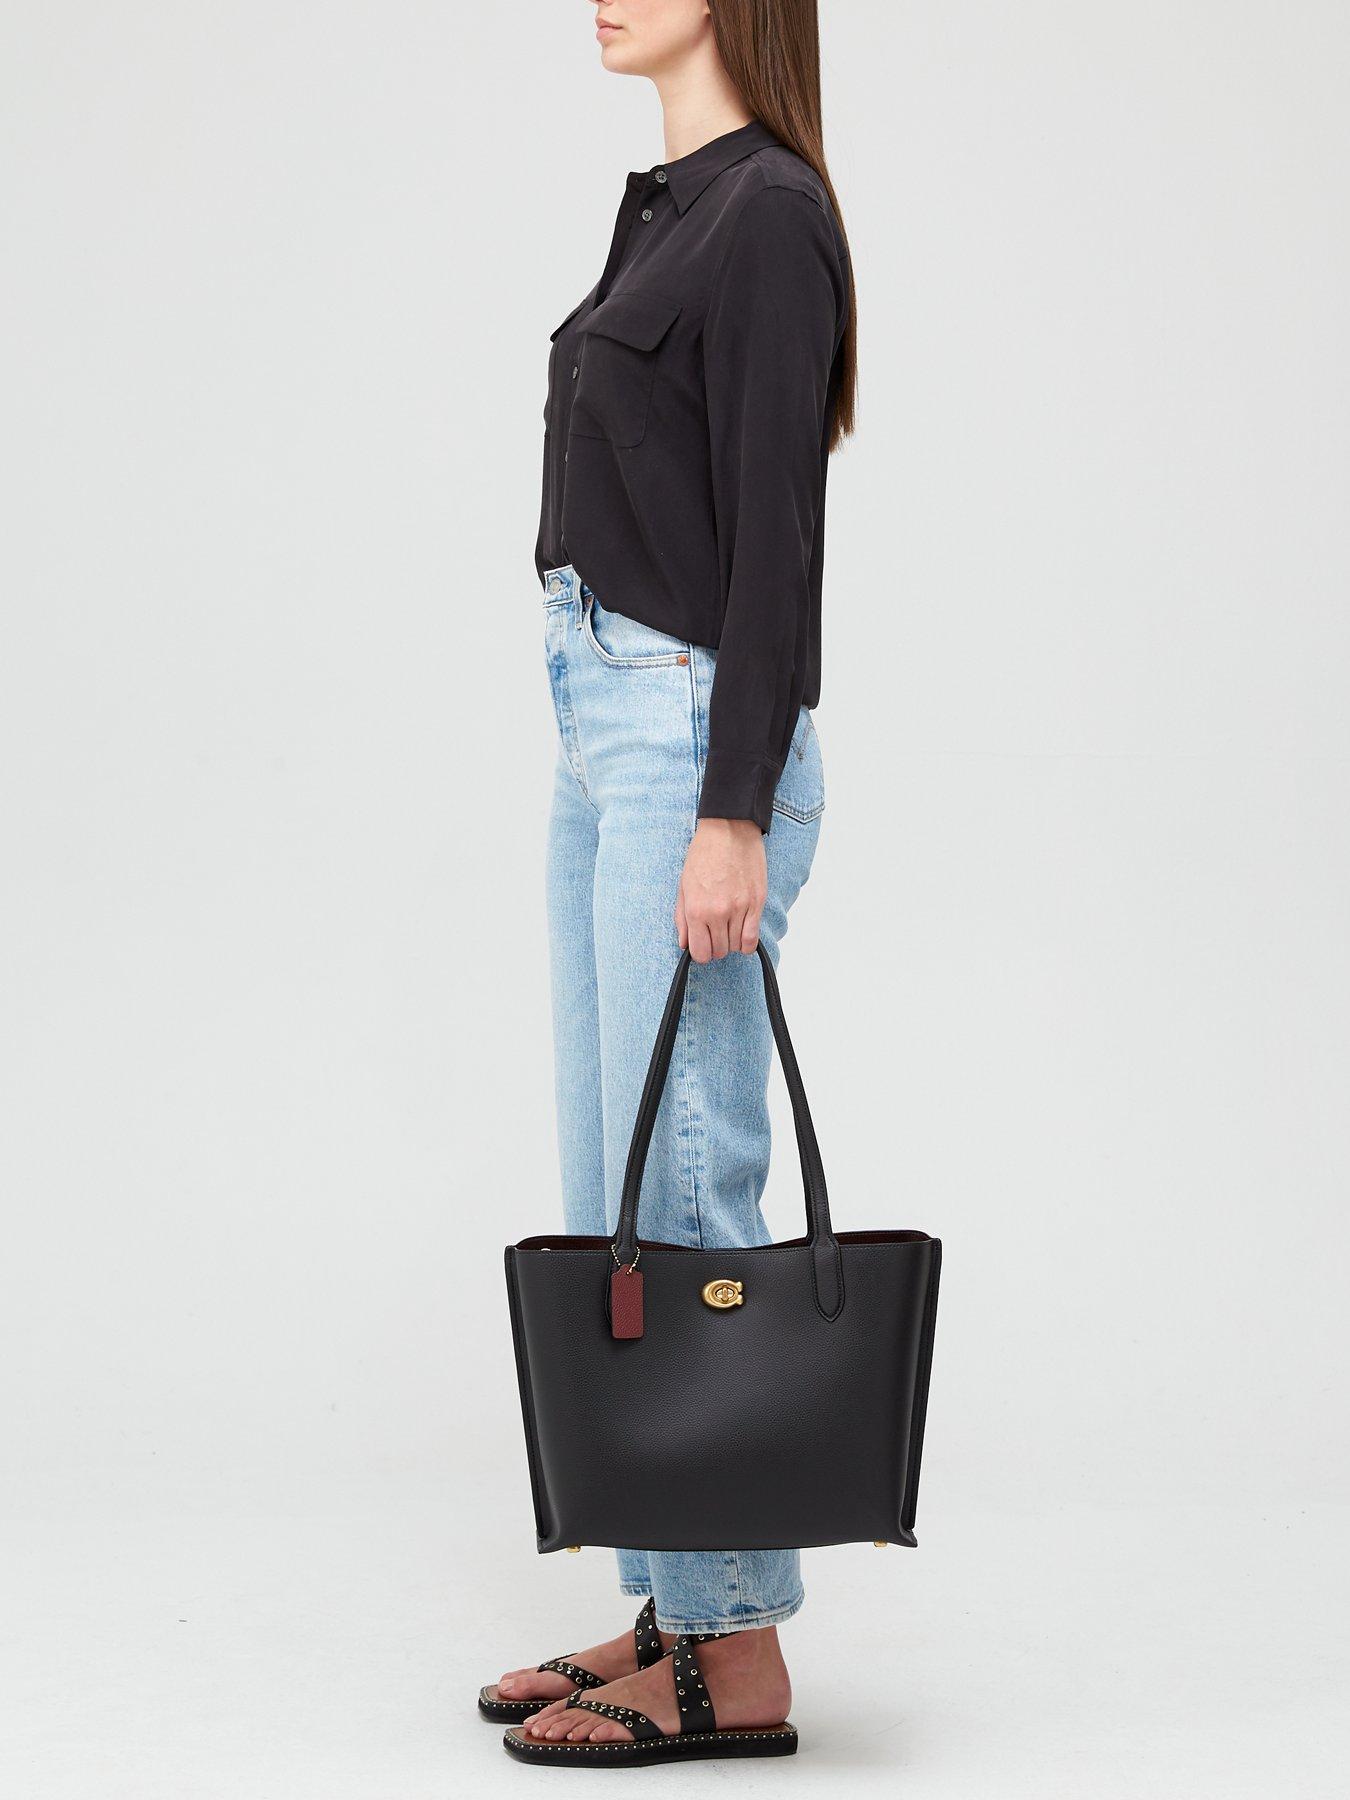 Willow Polished Pebble Leather Tote Bag - Black